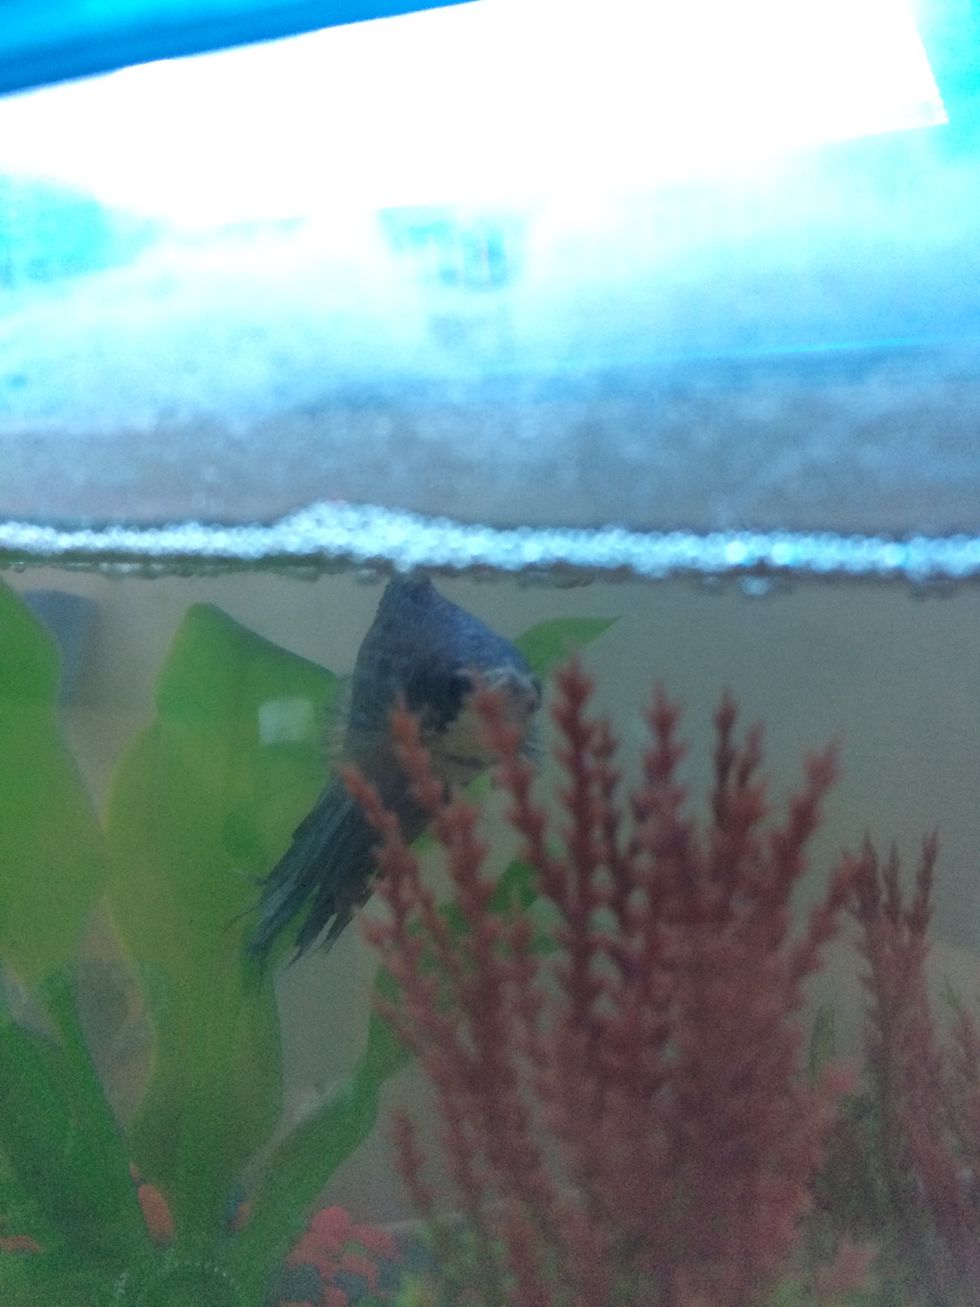 An Ode To Roger, My Fishie Friend